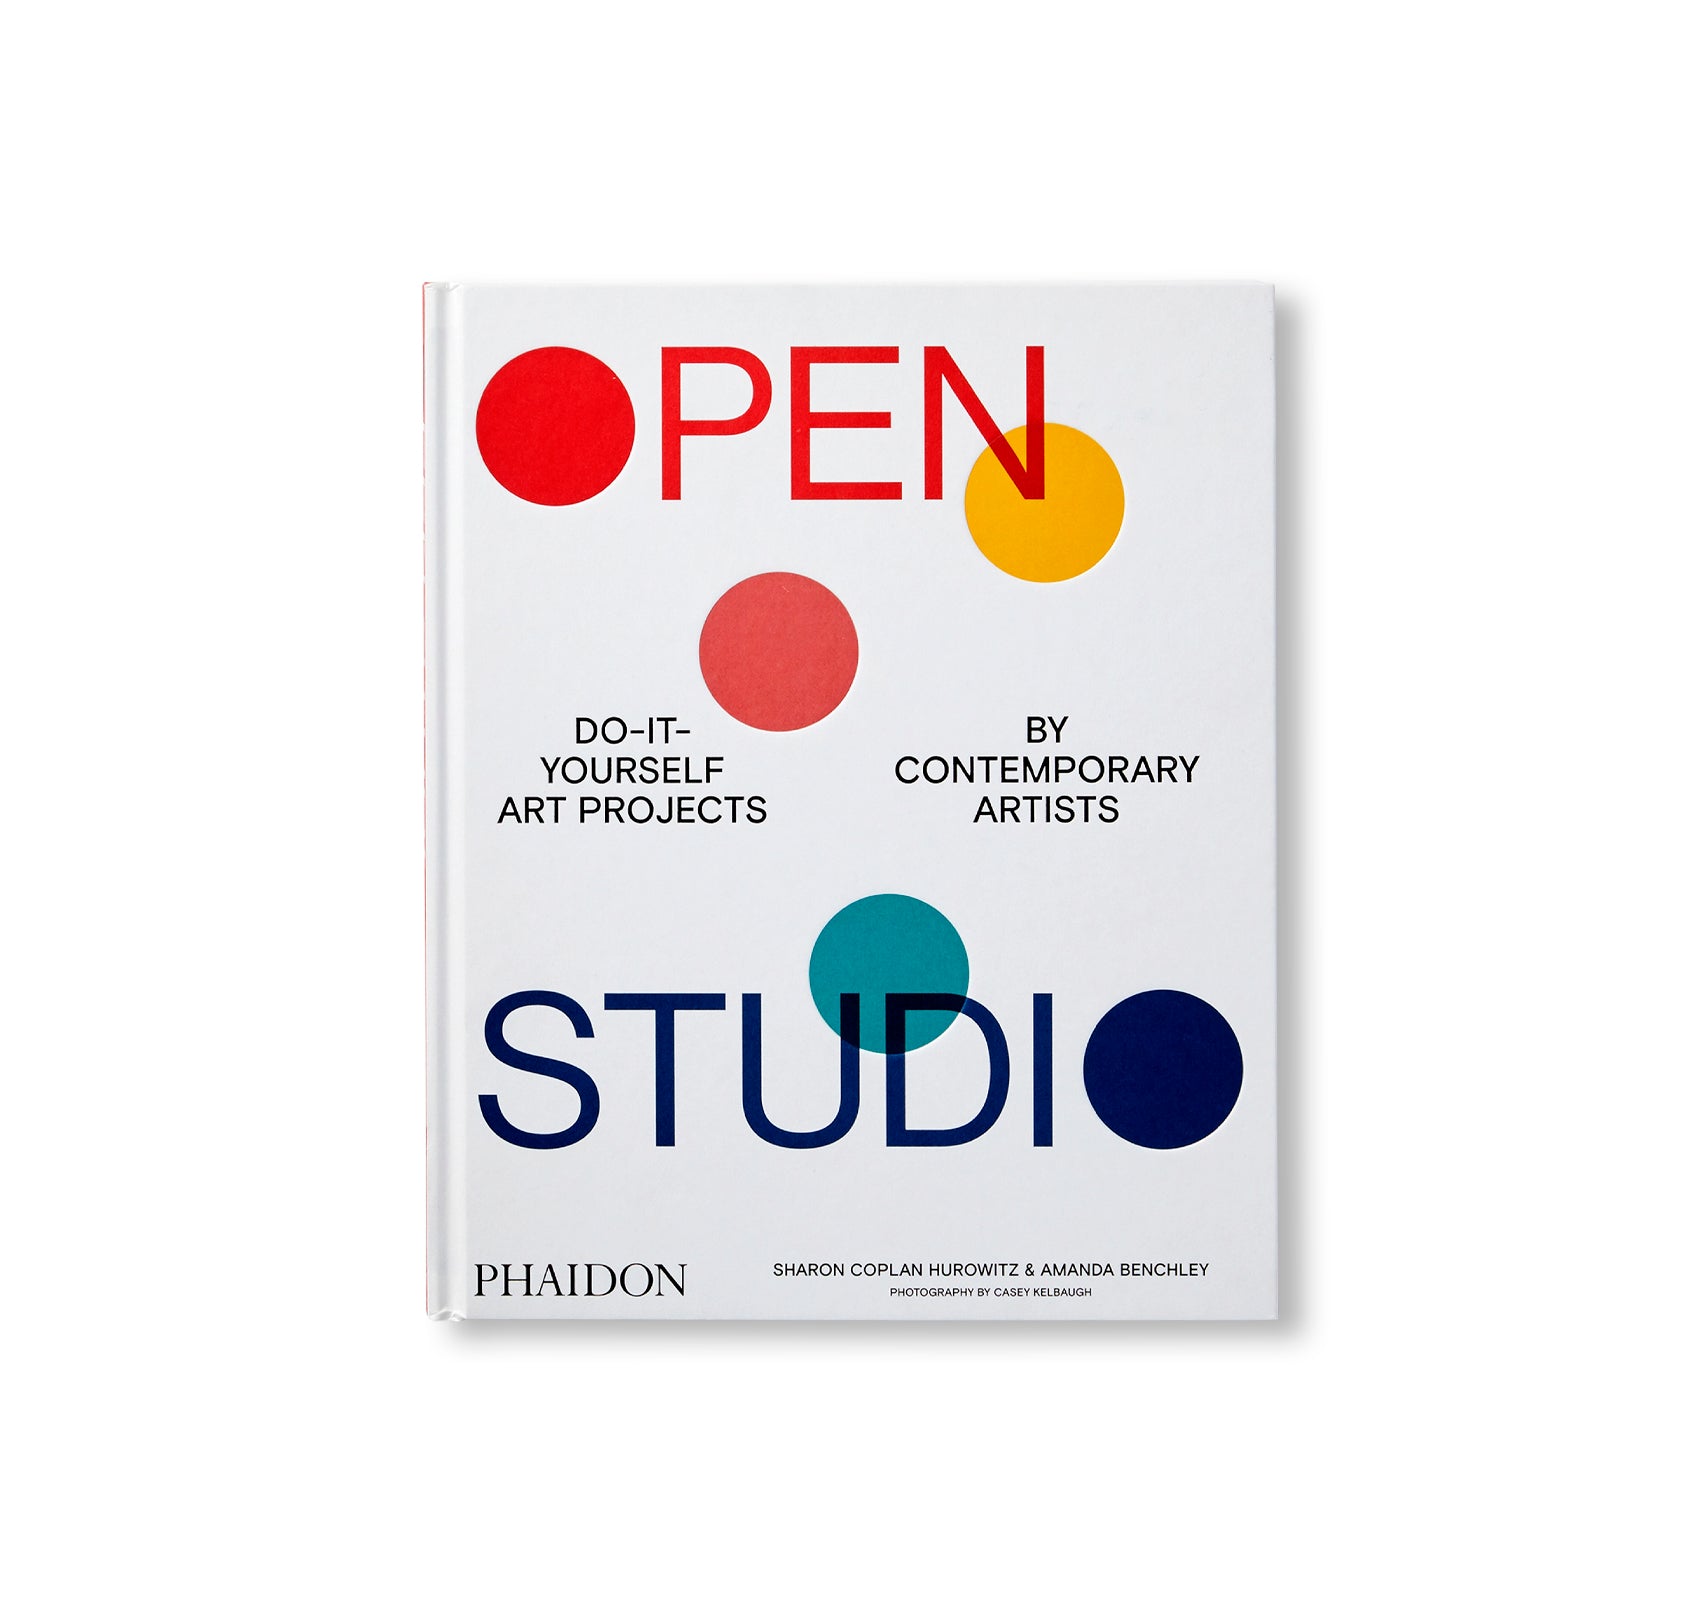 OPEN STUDIO: DO-IT-YOURSELF ART PROJECTS BY CONTEMPORARY ARTISTS